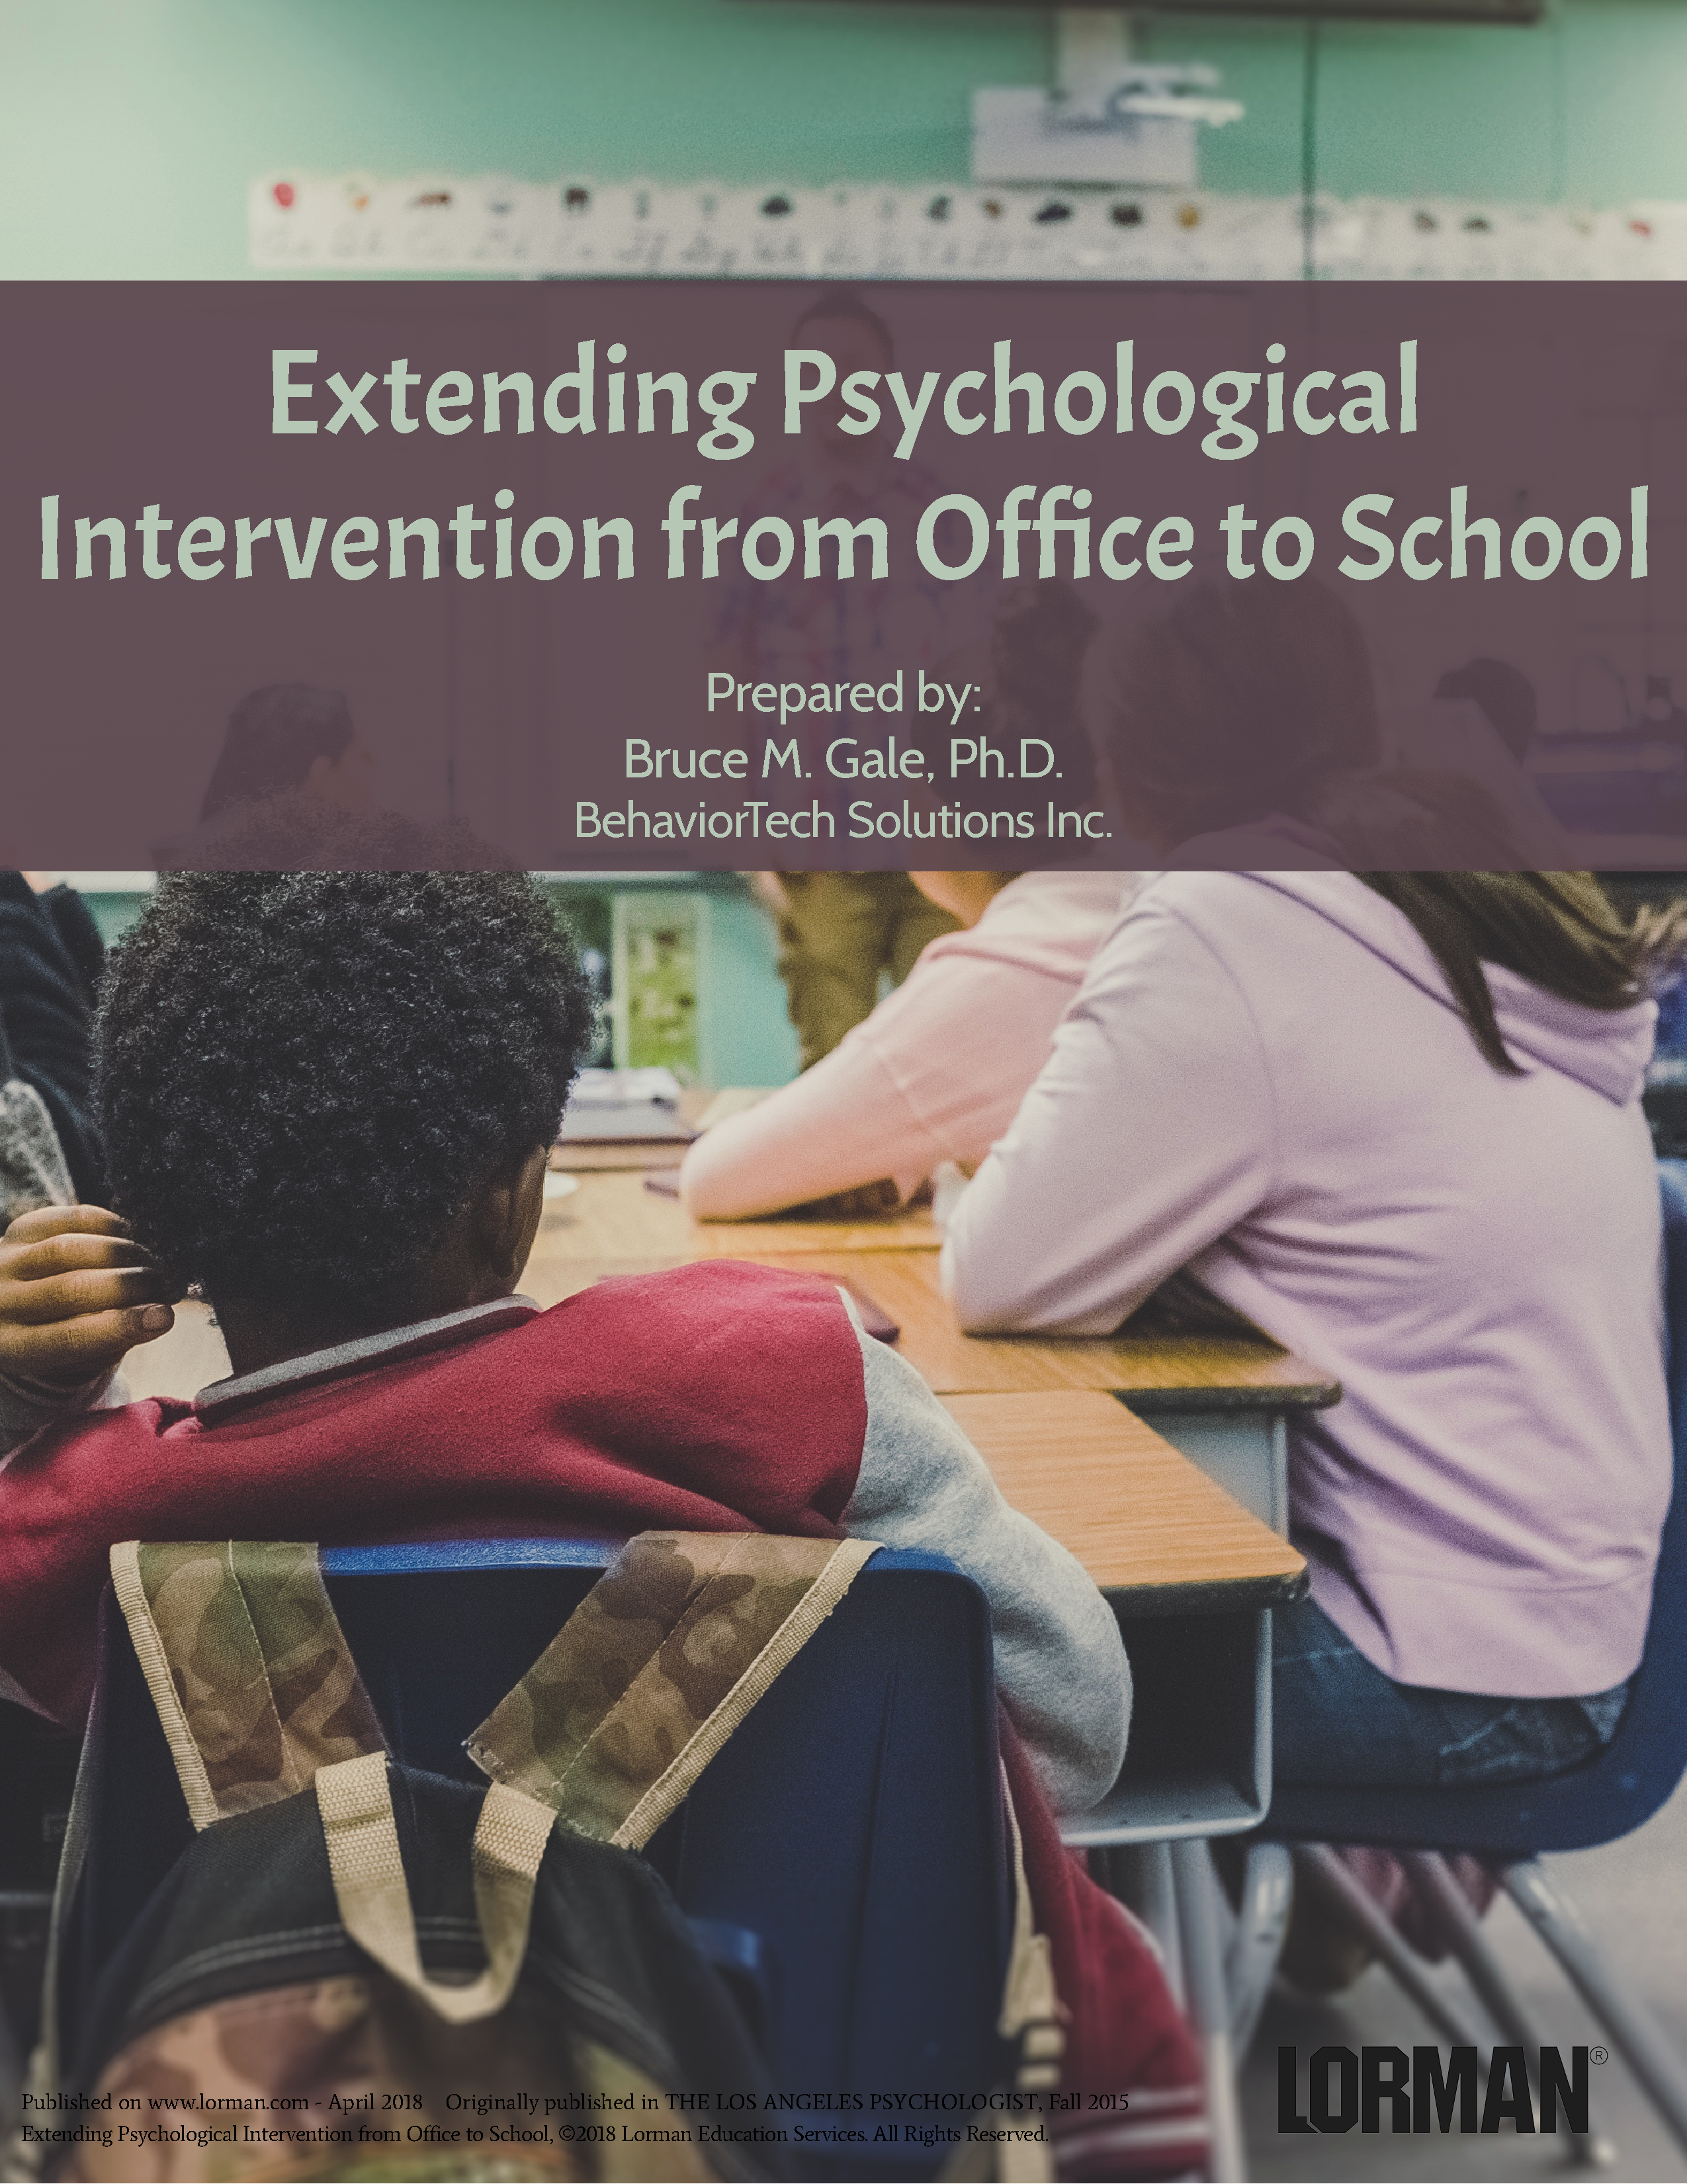 Extending Psychological Intervention from Office to School